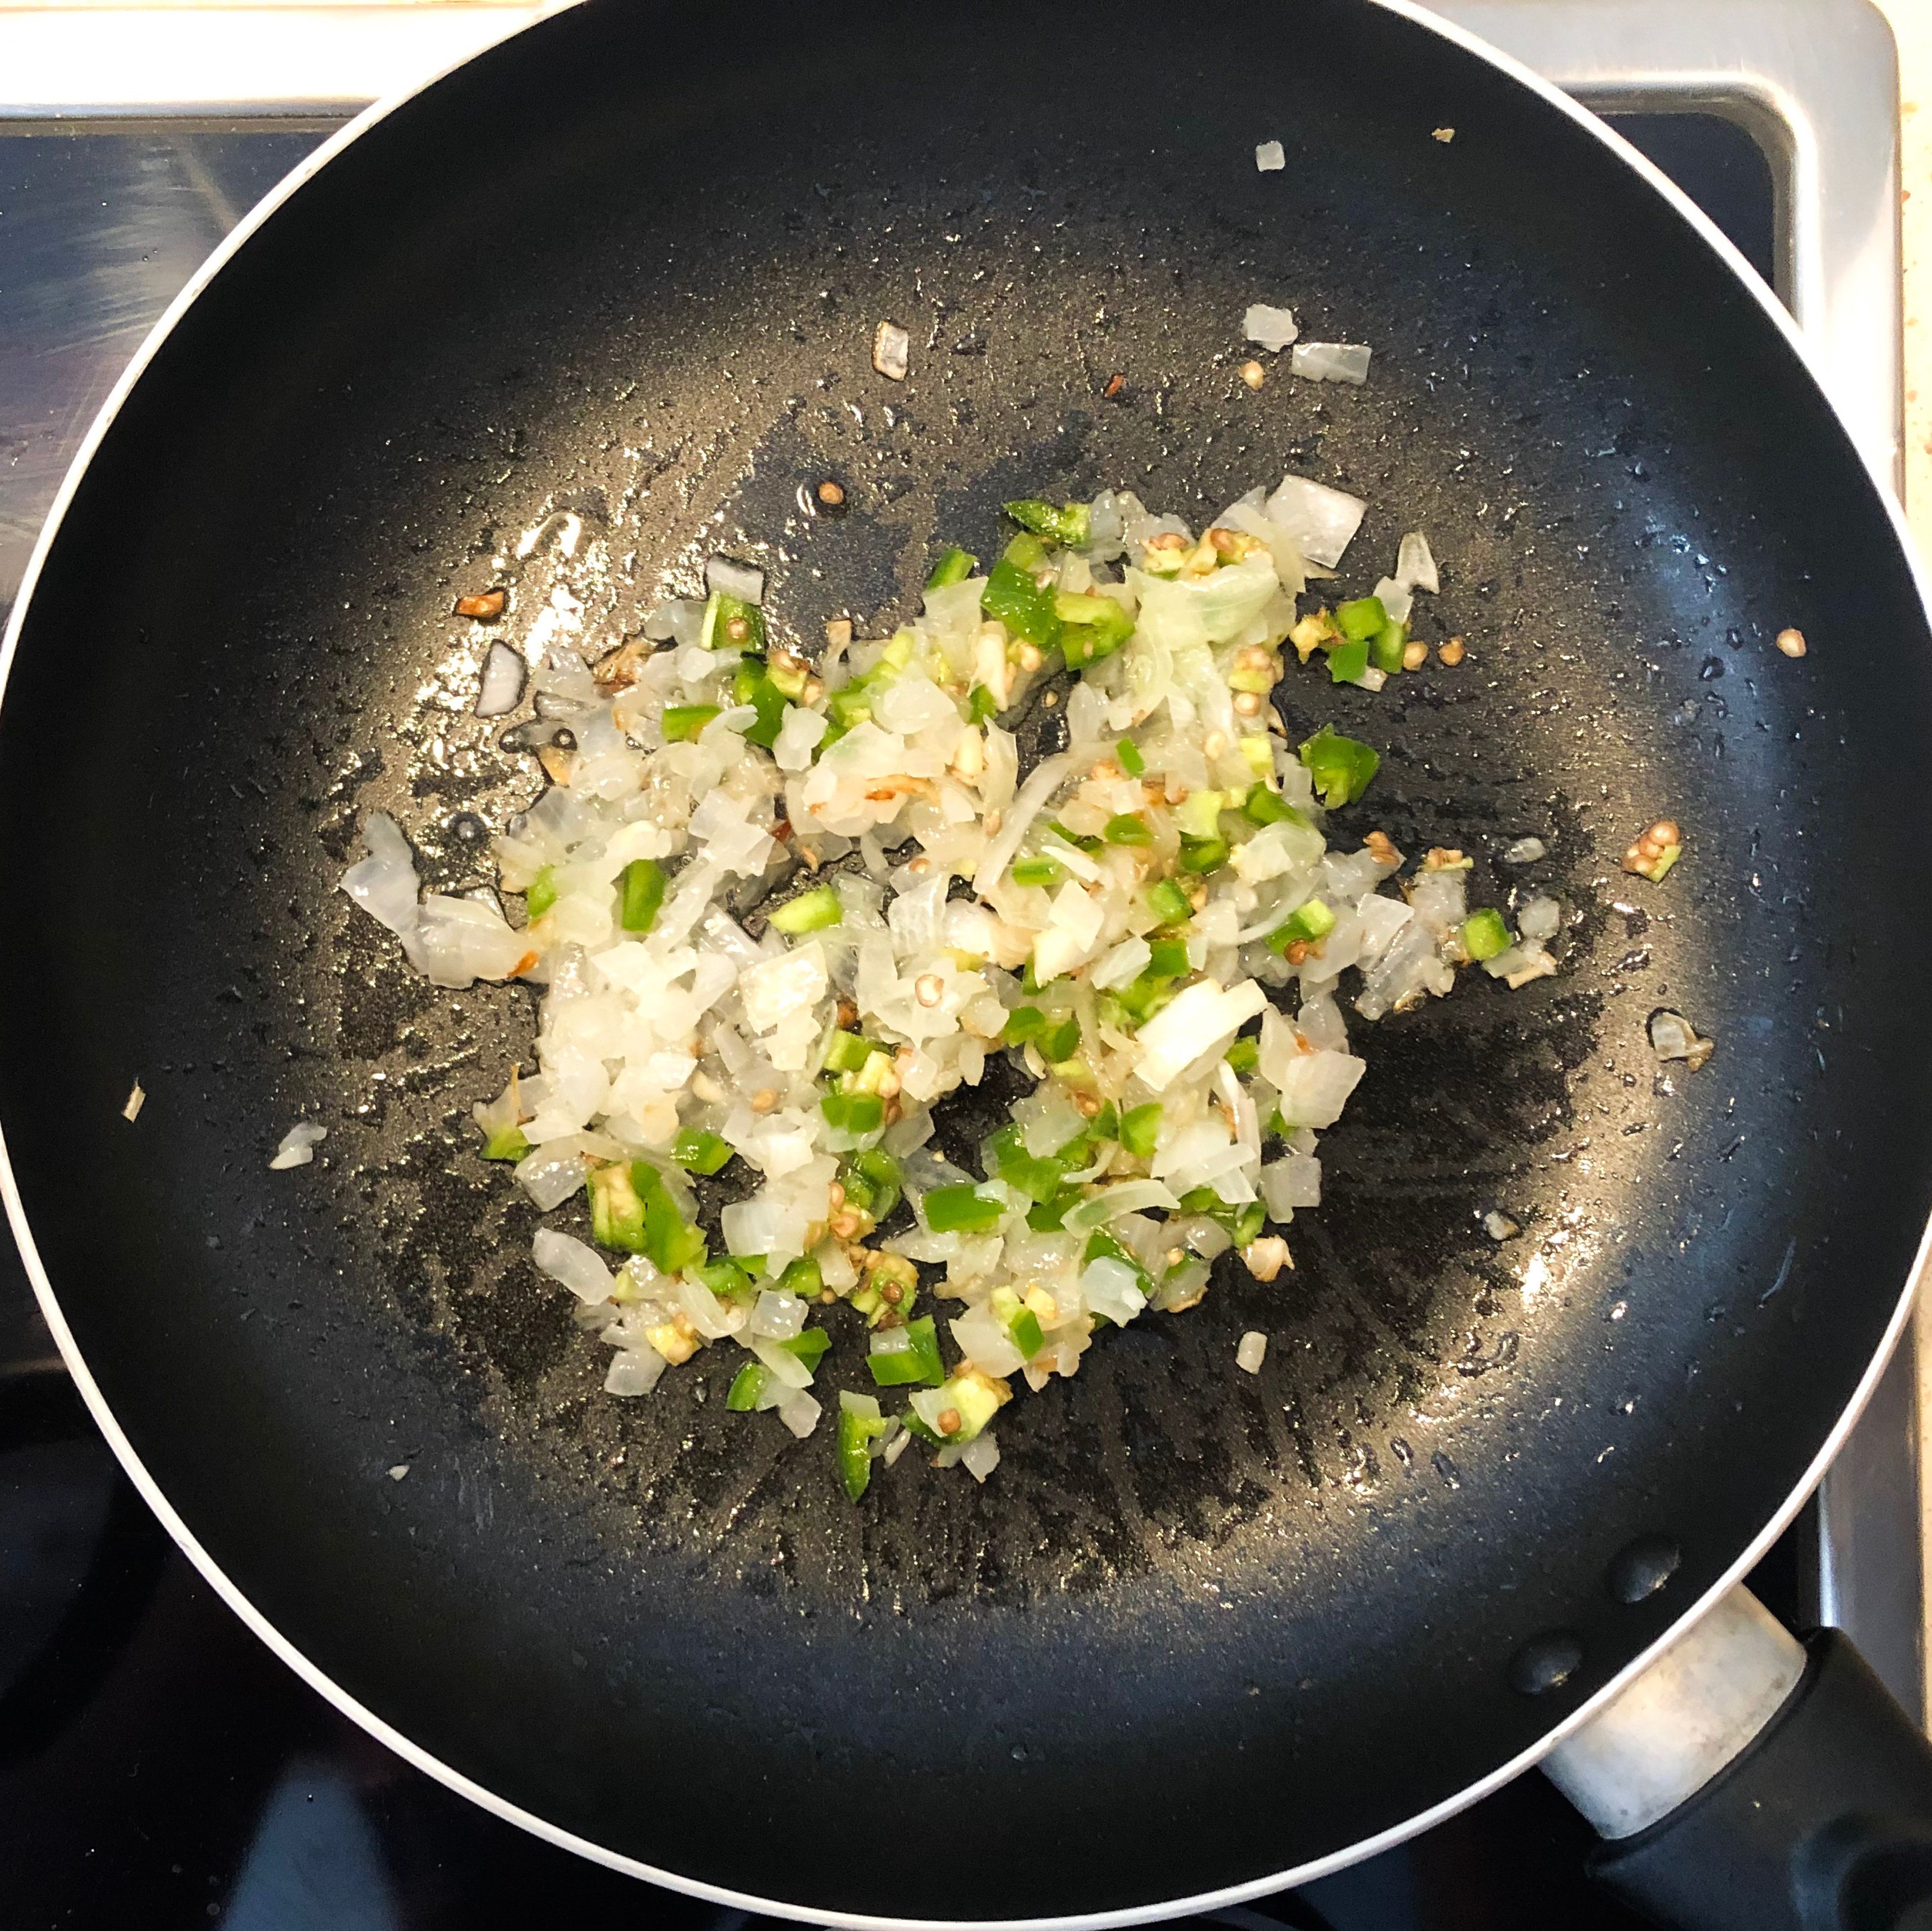 Third step: grab a pan and add some vegetable oil. Turn your stove to medium heat. When warm, add your minced onion & jalapeños. Move it around and let it cook for about 3-5 min...